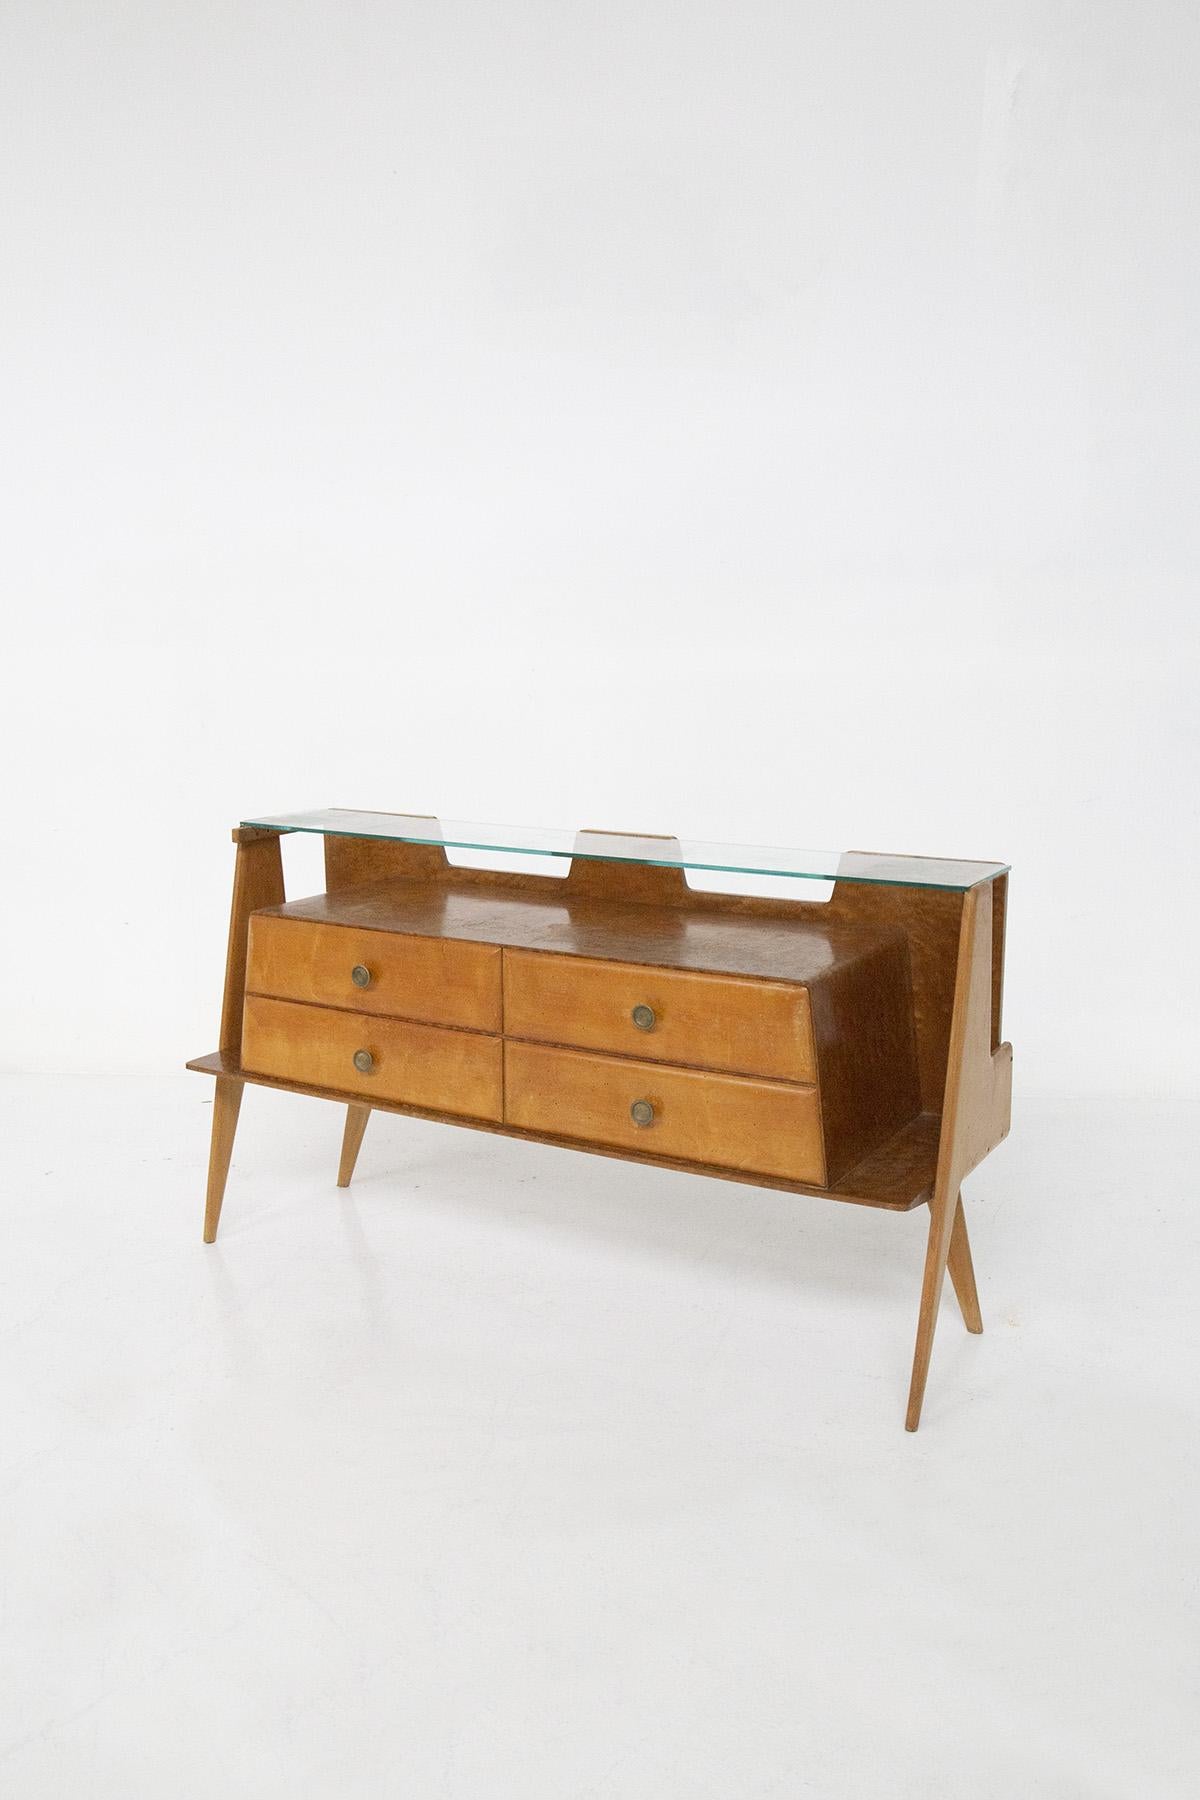 Elegant Italian sideboard or chest of drawers from the 1950s. The sideboard has a very geometric line typical of the Italian 1950s. Its particularity is given by several factors: the first its triangular shaped legs perfectly in line with the